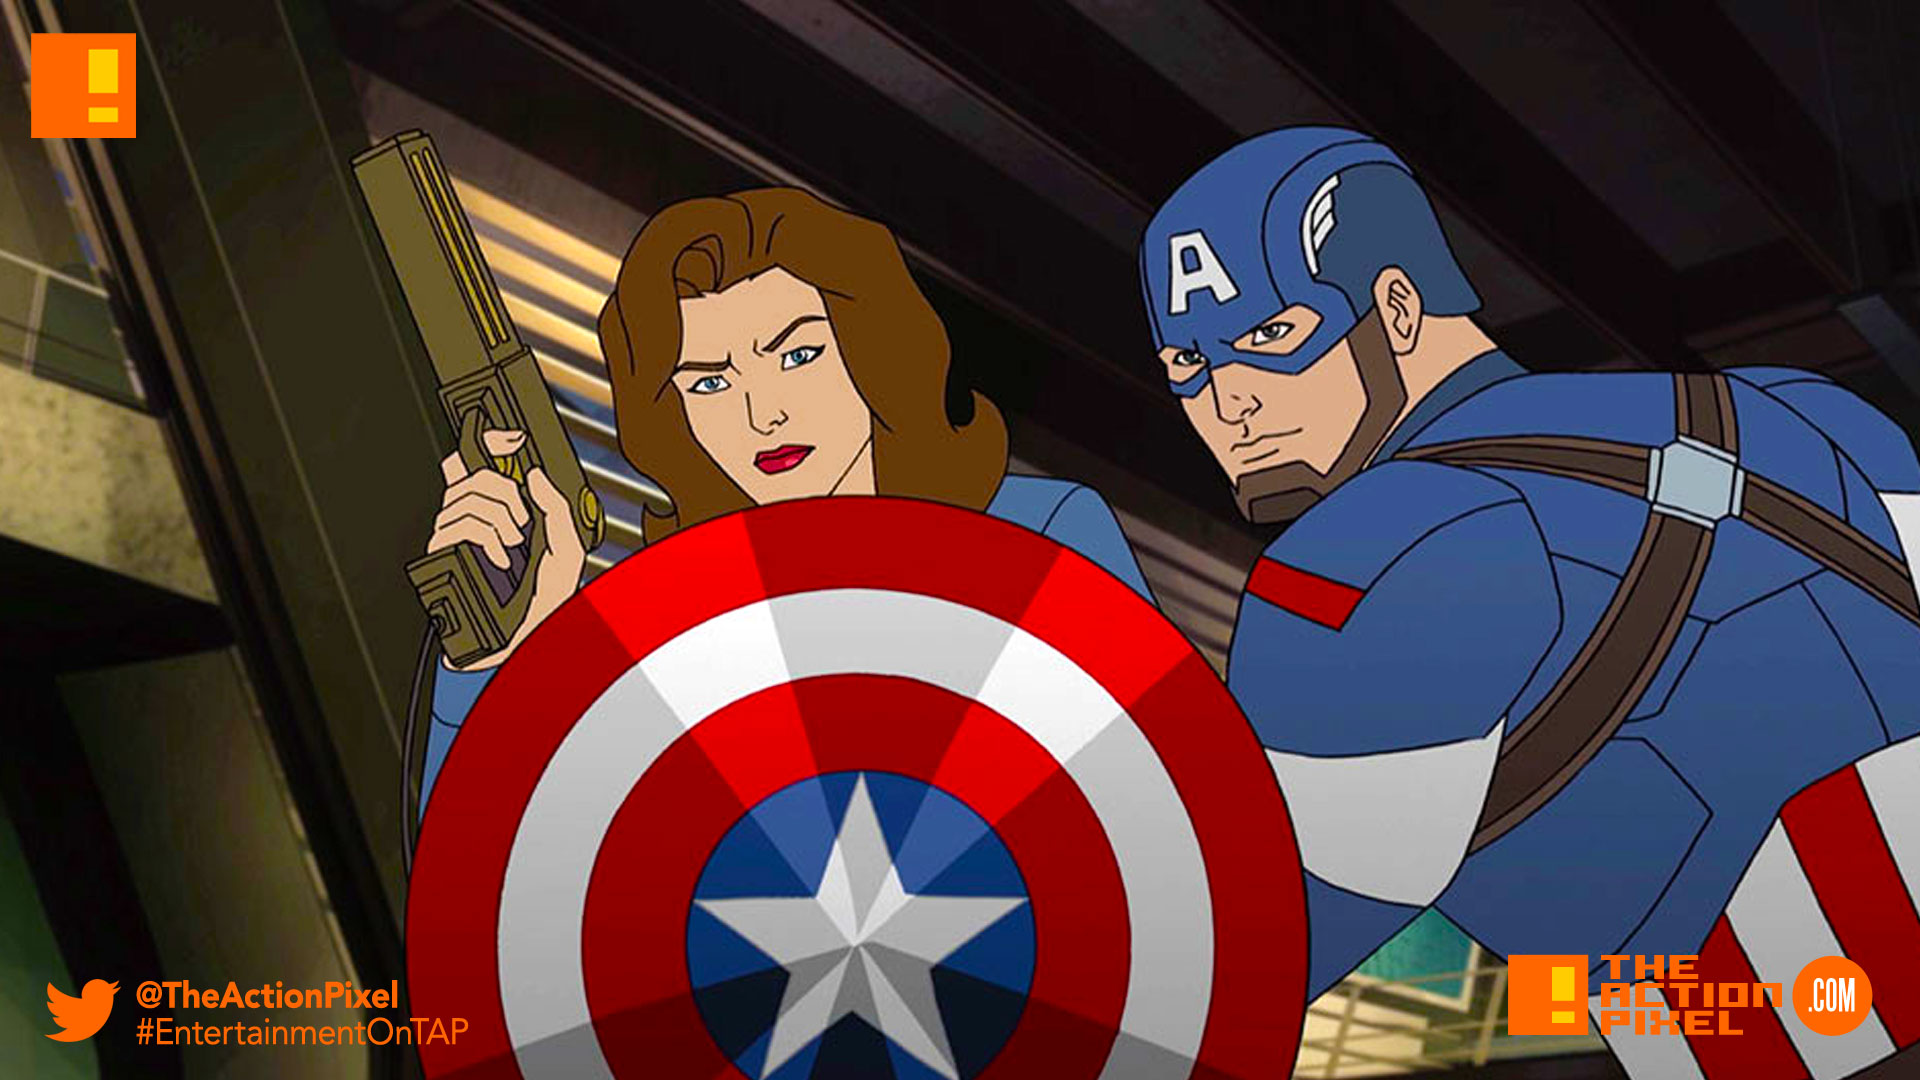 captain america, hayley atwell,peggy carter, secret wars, marvel, secret wars, marvel's avengers: secret wars, avengers: secret wars, avengers secret wars, captain america, disney xd, disney, 